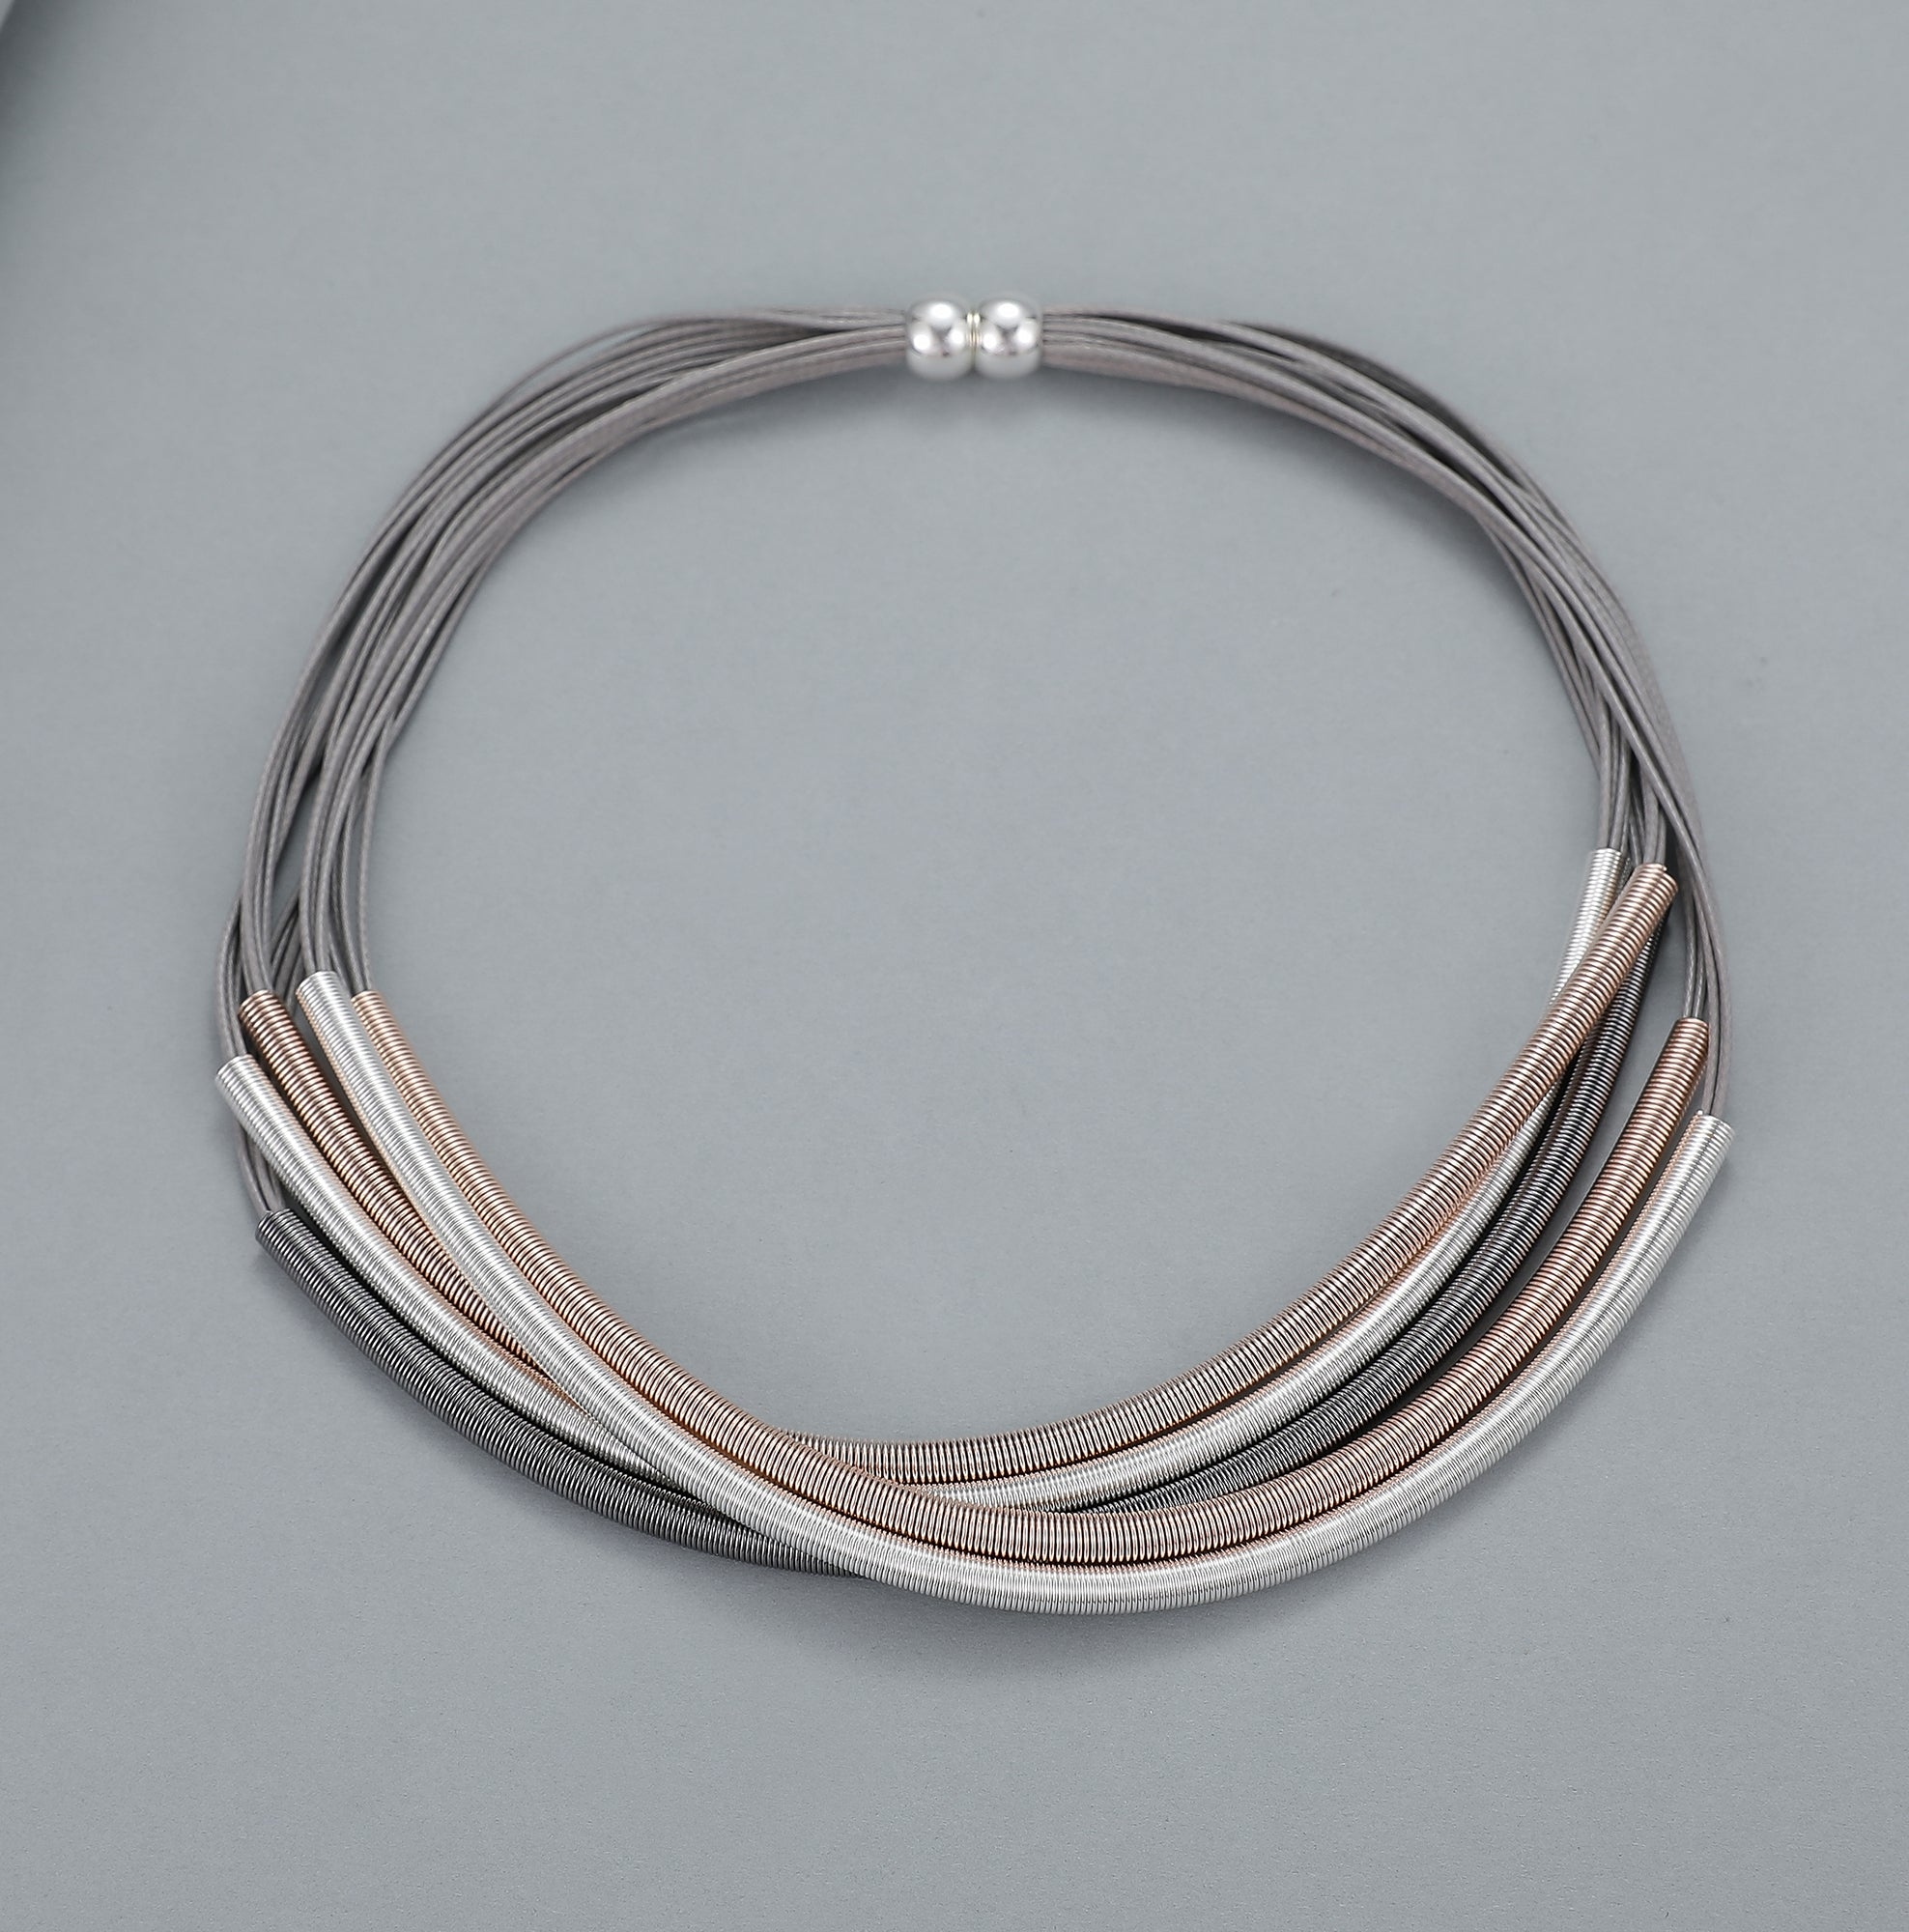 Short magnetic necklace with rose gold, silver and pewter flexible coiled wire